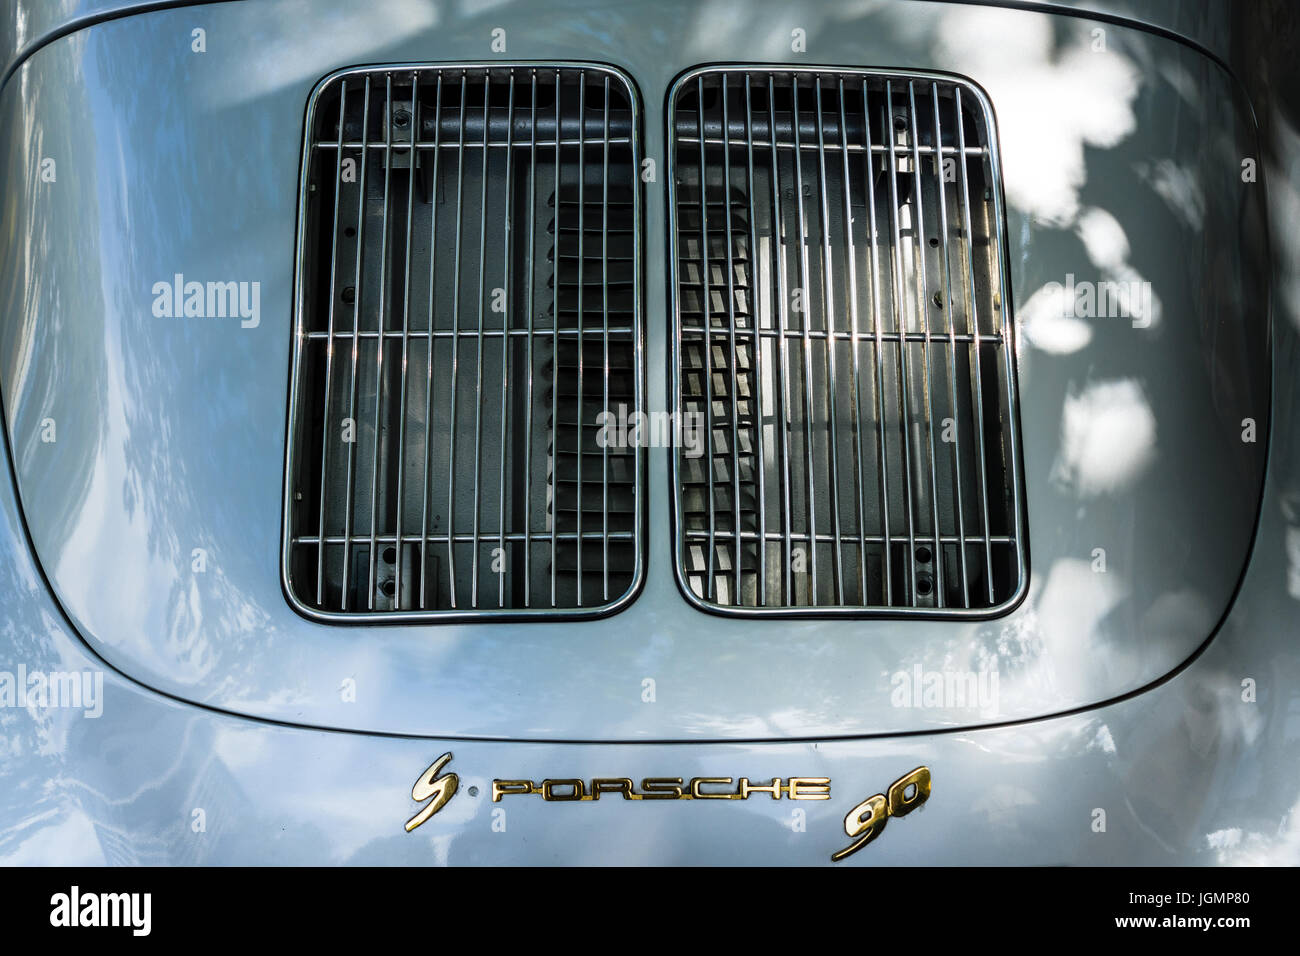 BERLIN - JUNE 17, 2017: Ventilation grilles for air conditioning of the engine compartment of a sports car Porsche 356. Classic Days Berlin 2017. Stock Photo